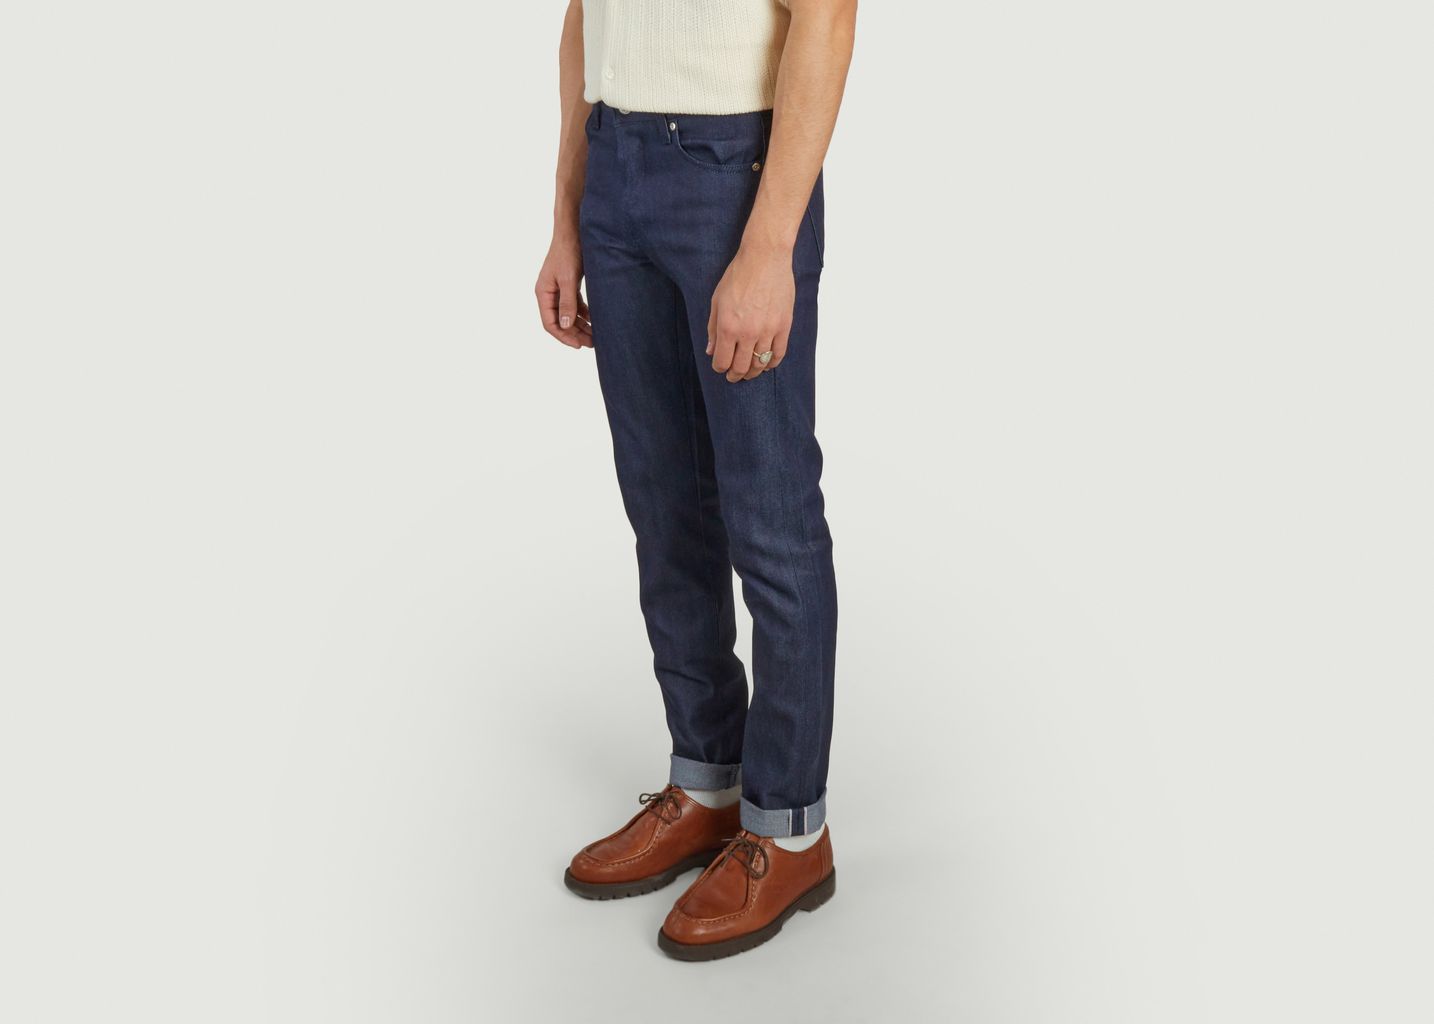 Jeans Super Guy Spring Garden Selvedge - Naked and Famous